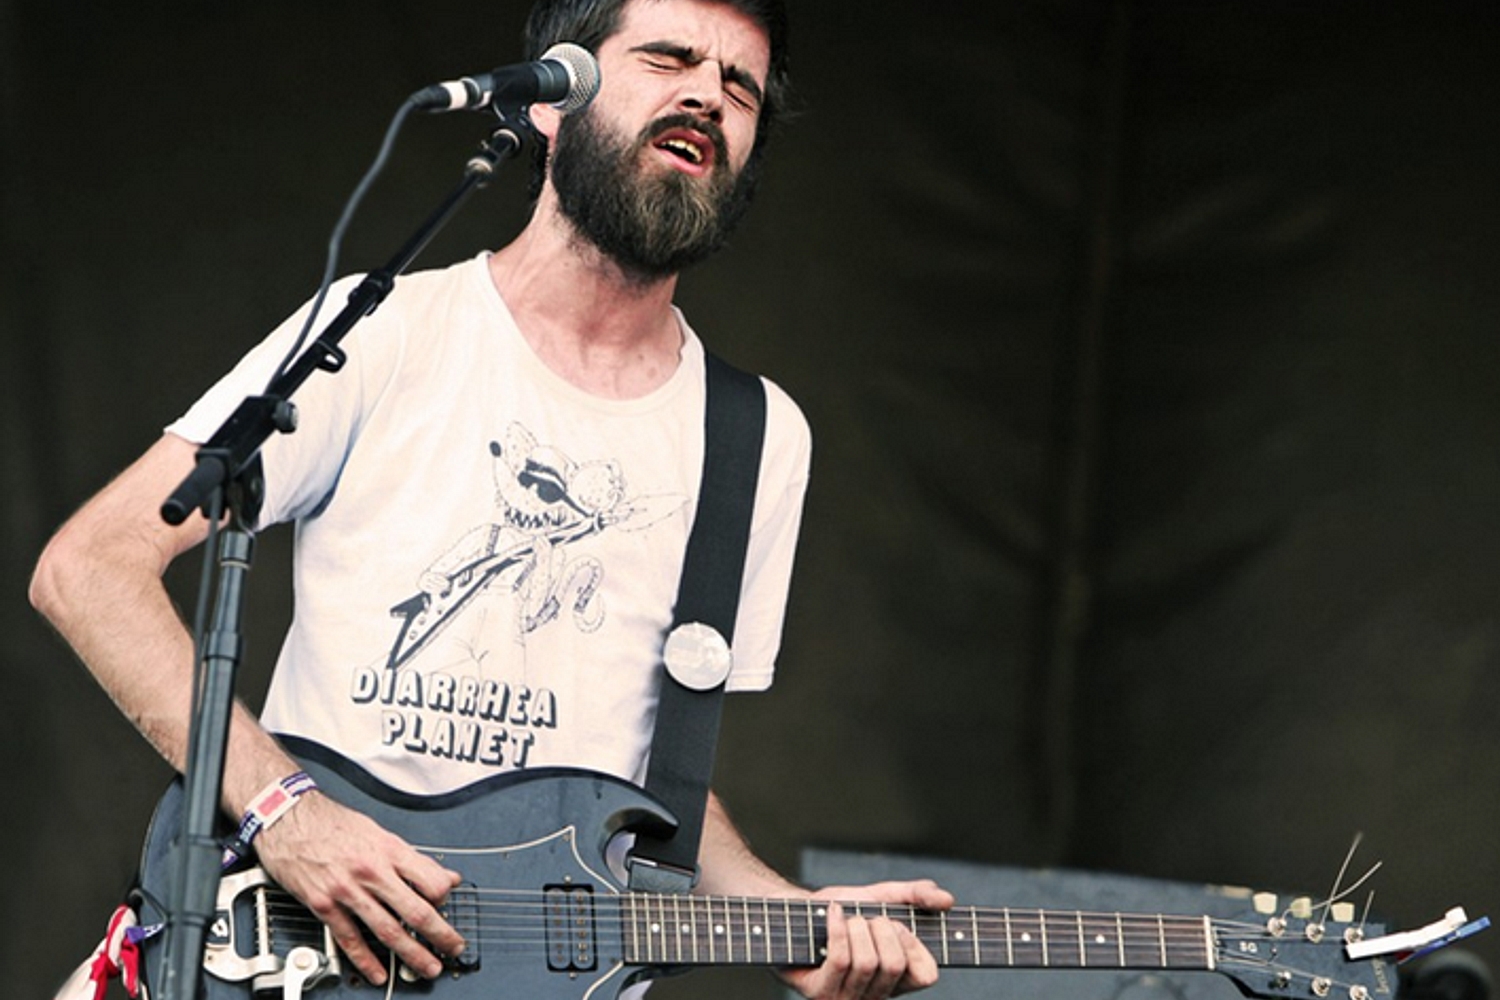 Titus Andronicus have released a new ‘Grandma friendly’ remix of ‘Fired Up’